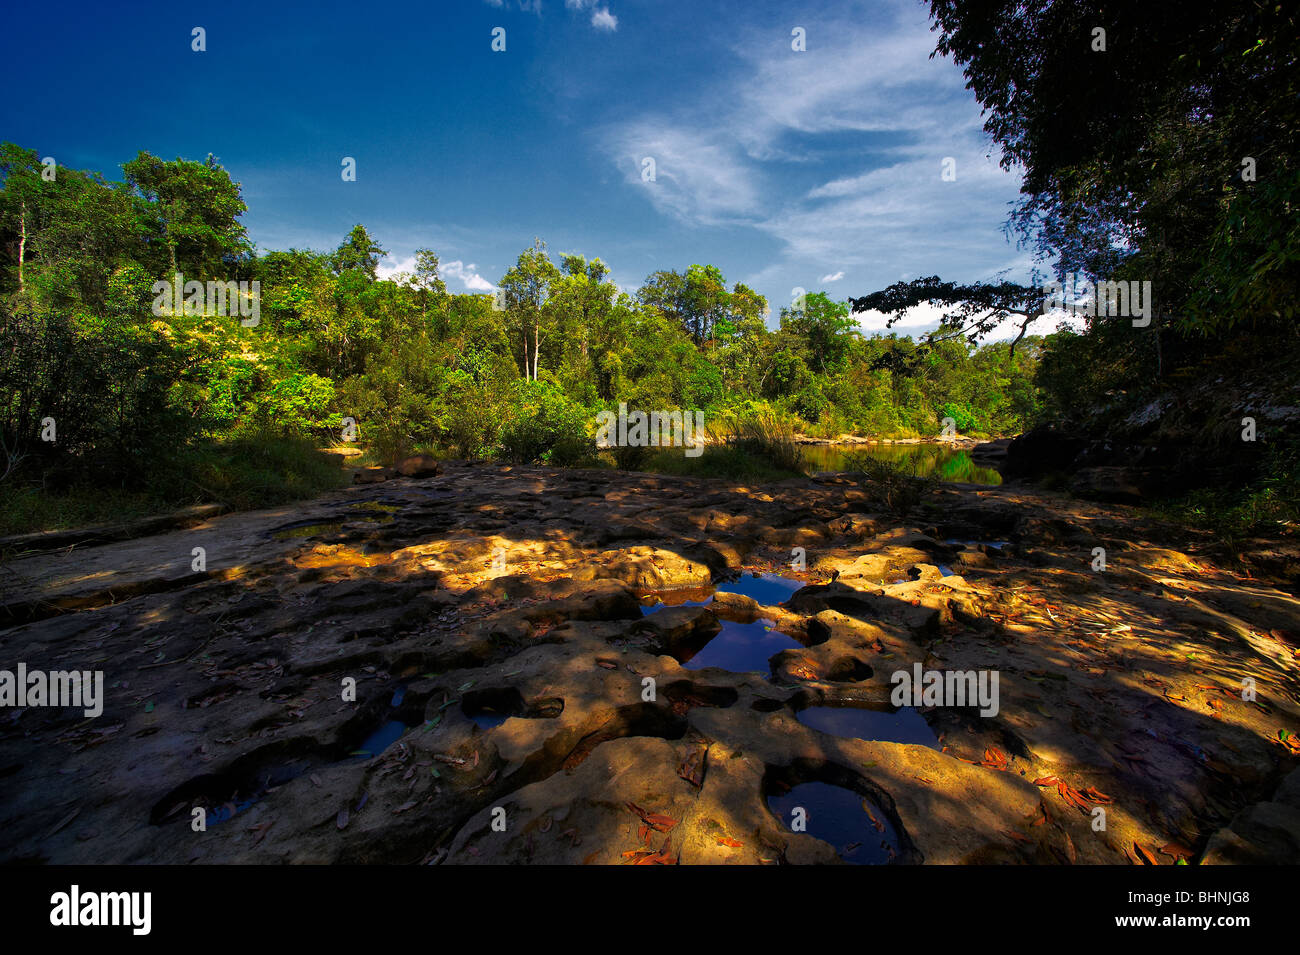 Tropical forest. Laos. Stock Photo